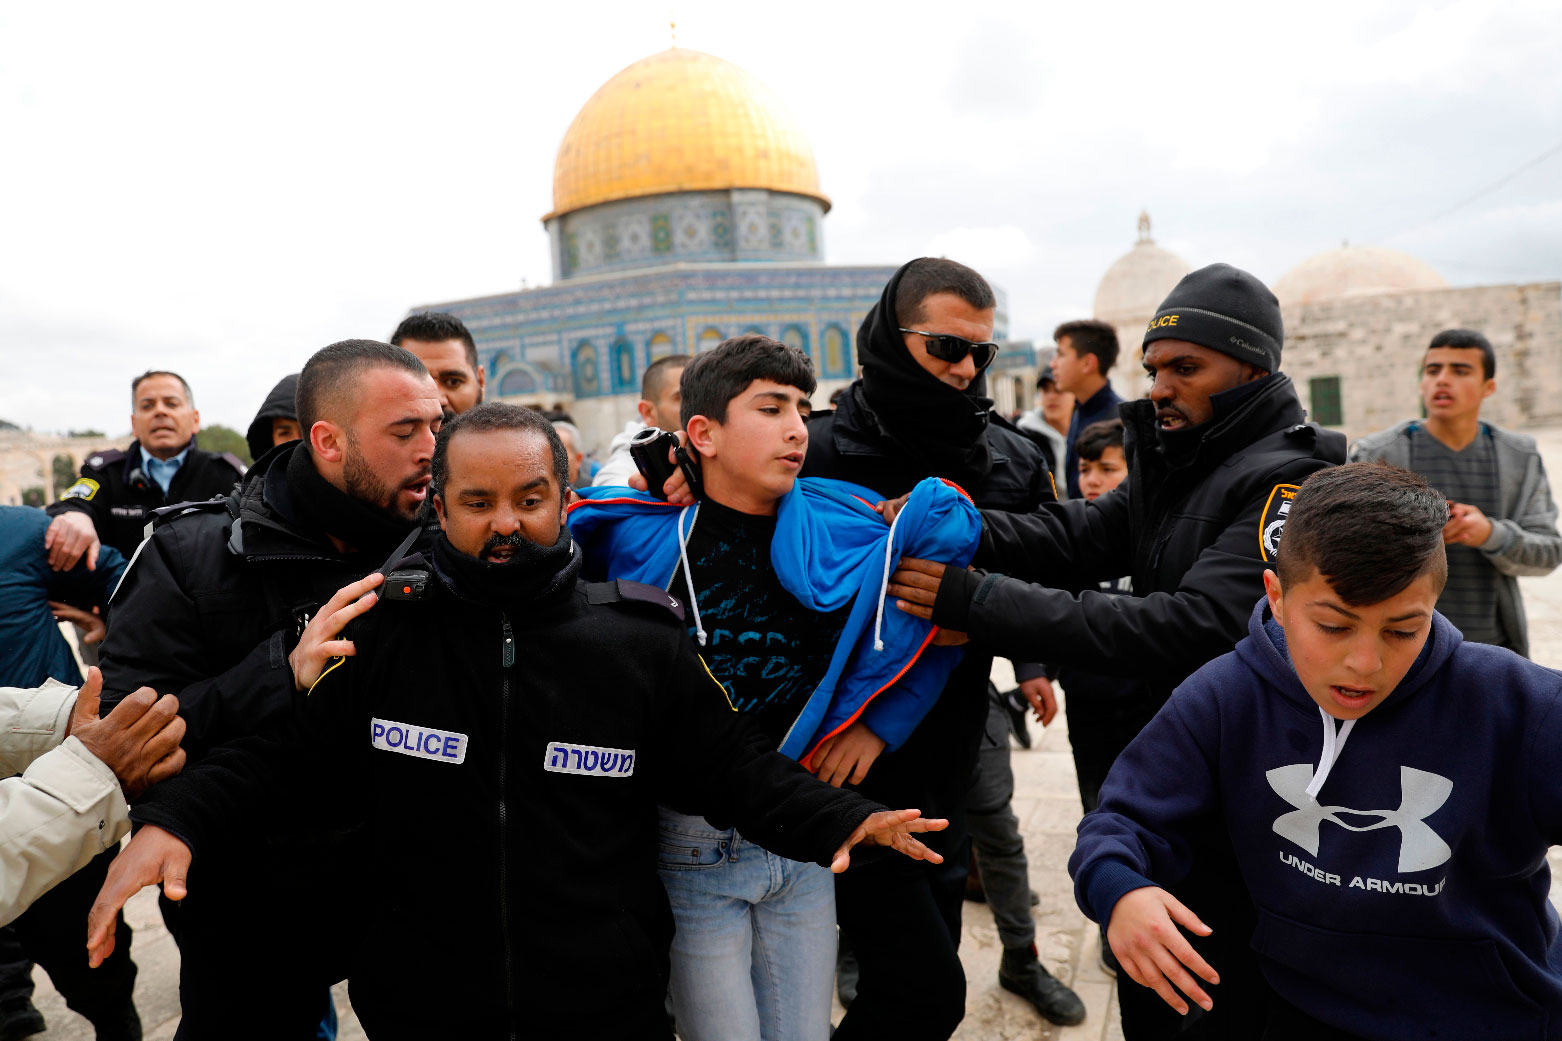 Israeli policemen detain a young Palestinian demonstrator during clashes, after protesters tried to break the lock on a gate at the Al Aqsa mosque compound in Jerusalem's Old City on February 18, 2019, after it was closed by Israeli police.